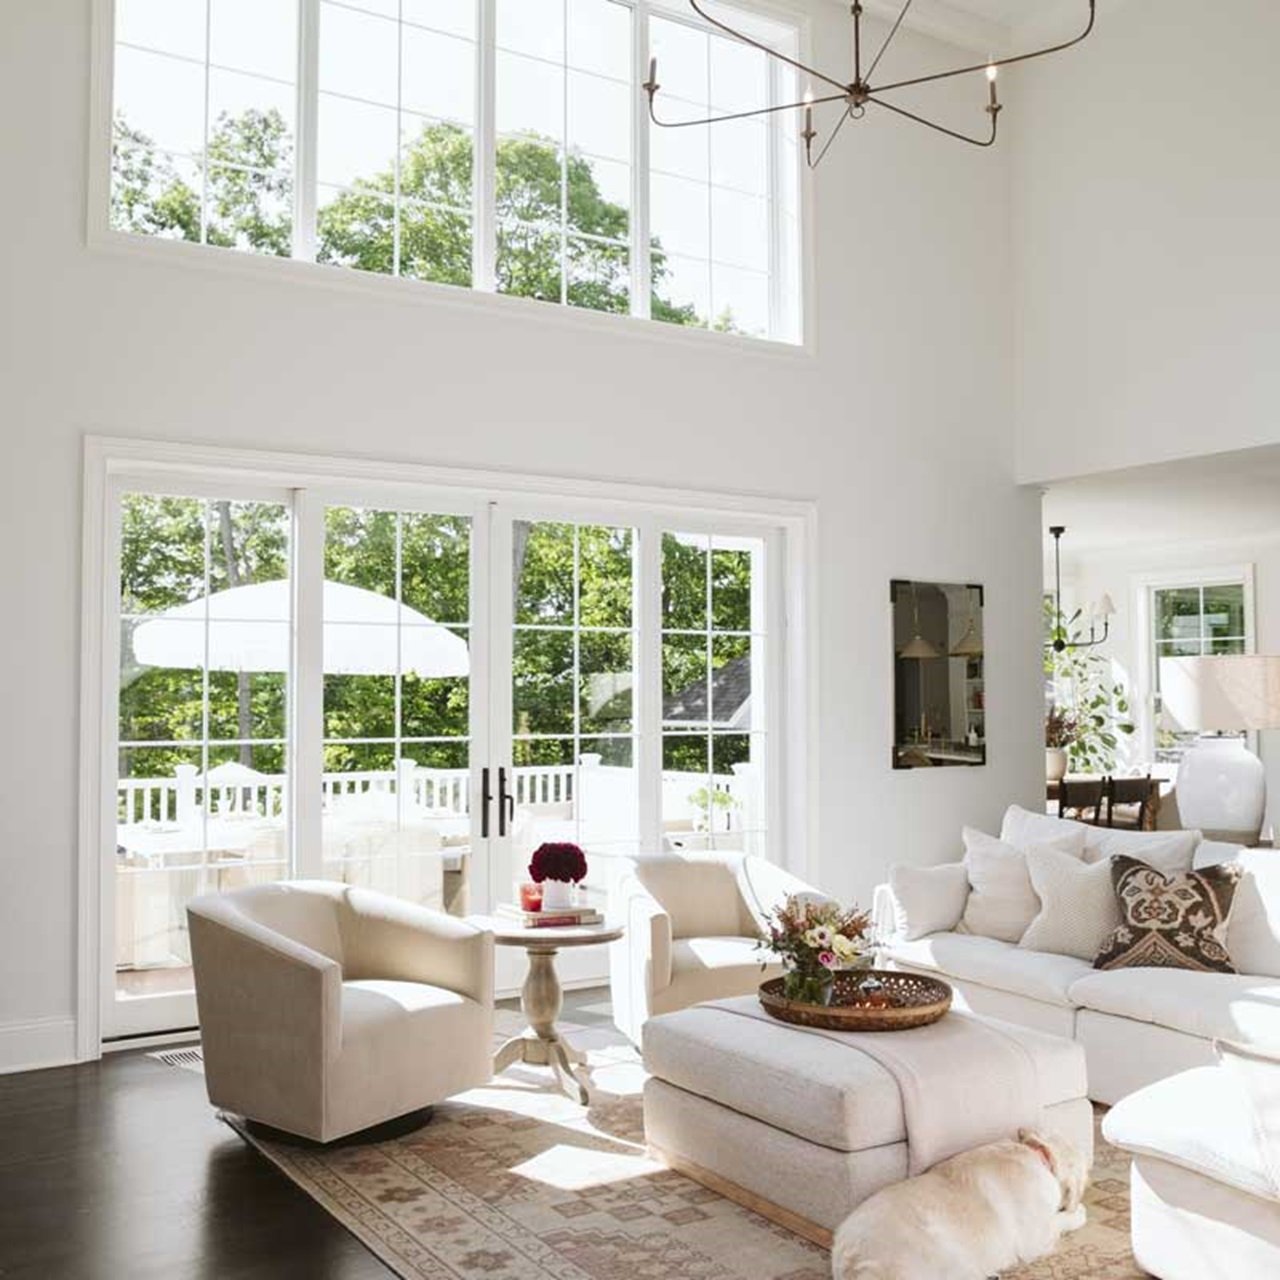 Marvin Elevate Sliding French Door in a white living room with tall ceilings